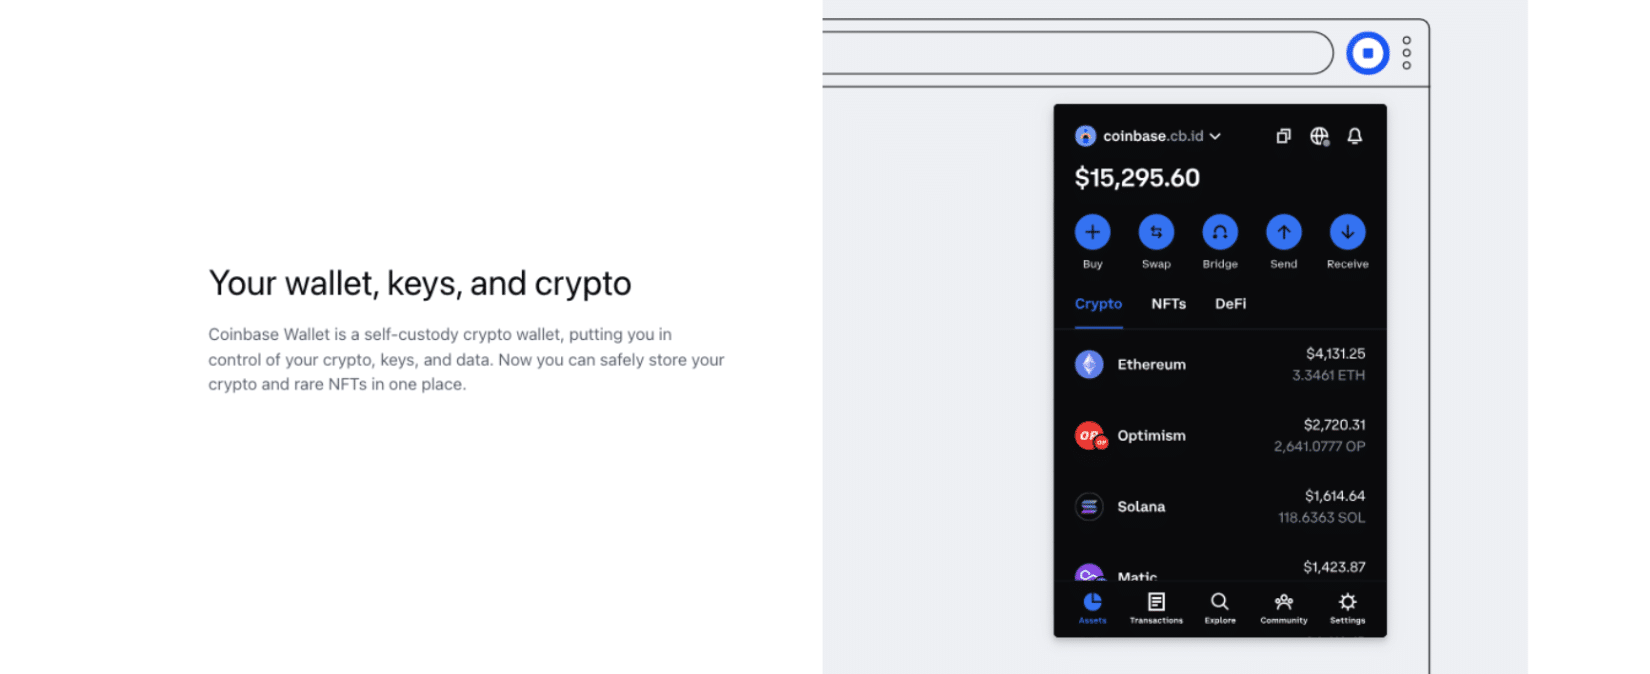 In Coinbase safe? Not really, in my opinion.